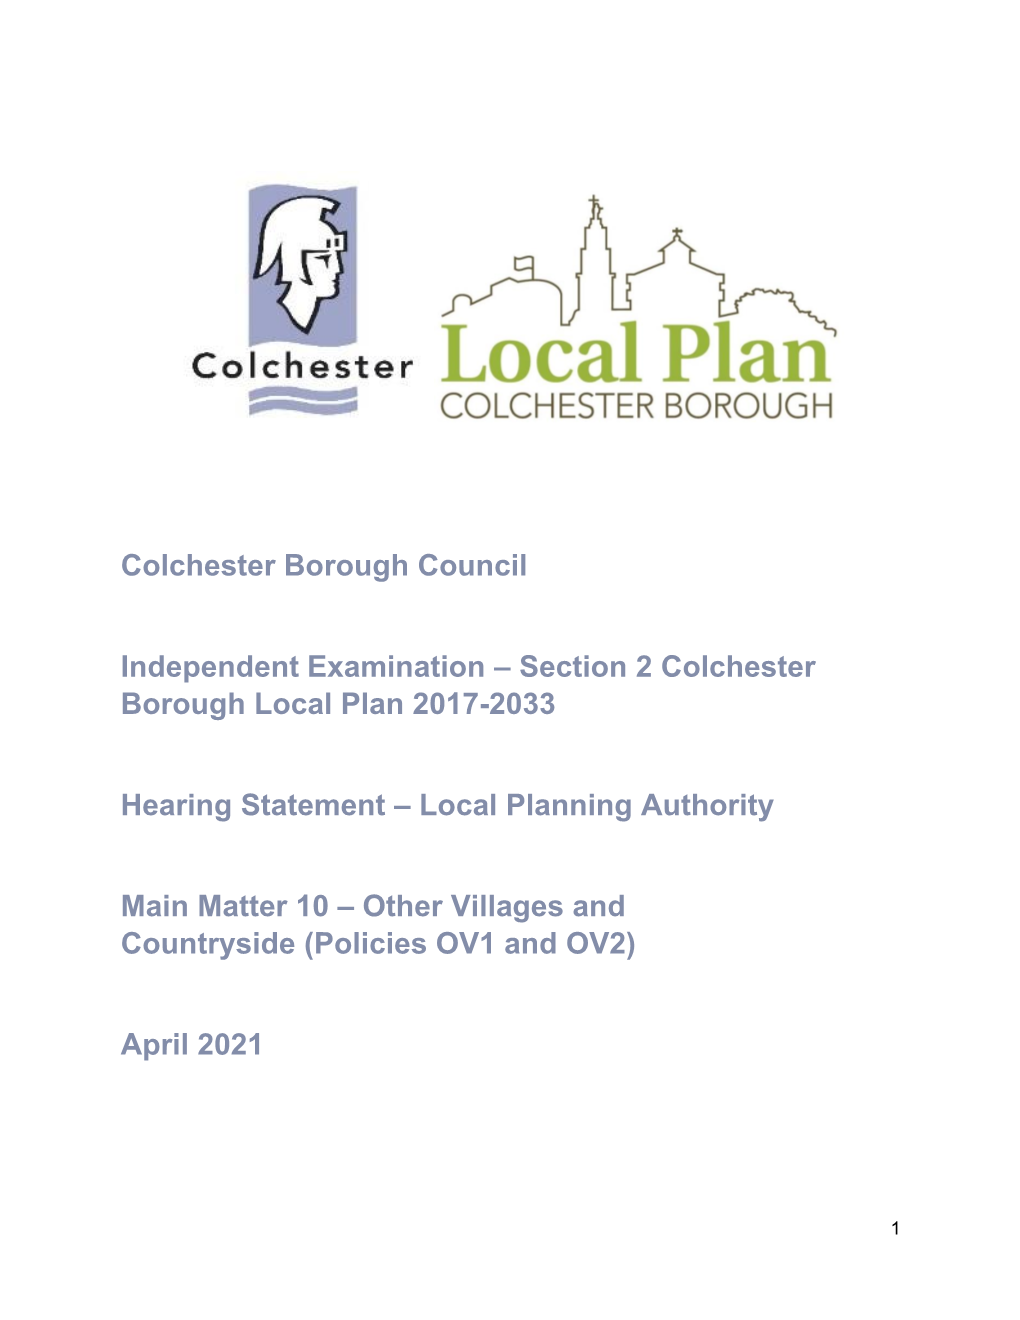 Section 2 Colchester Borough Local Plan 2017-2033 Hearing Statement